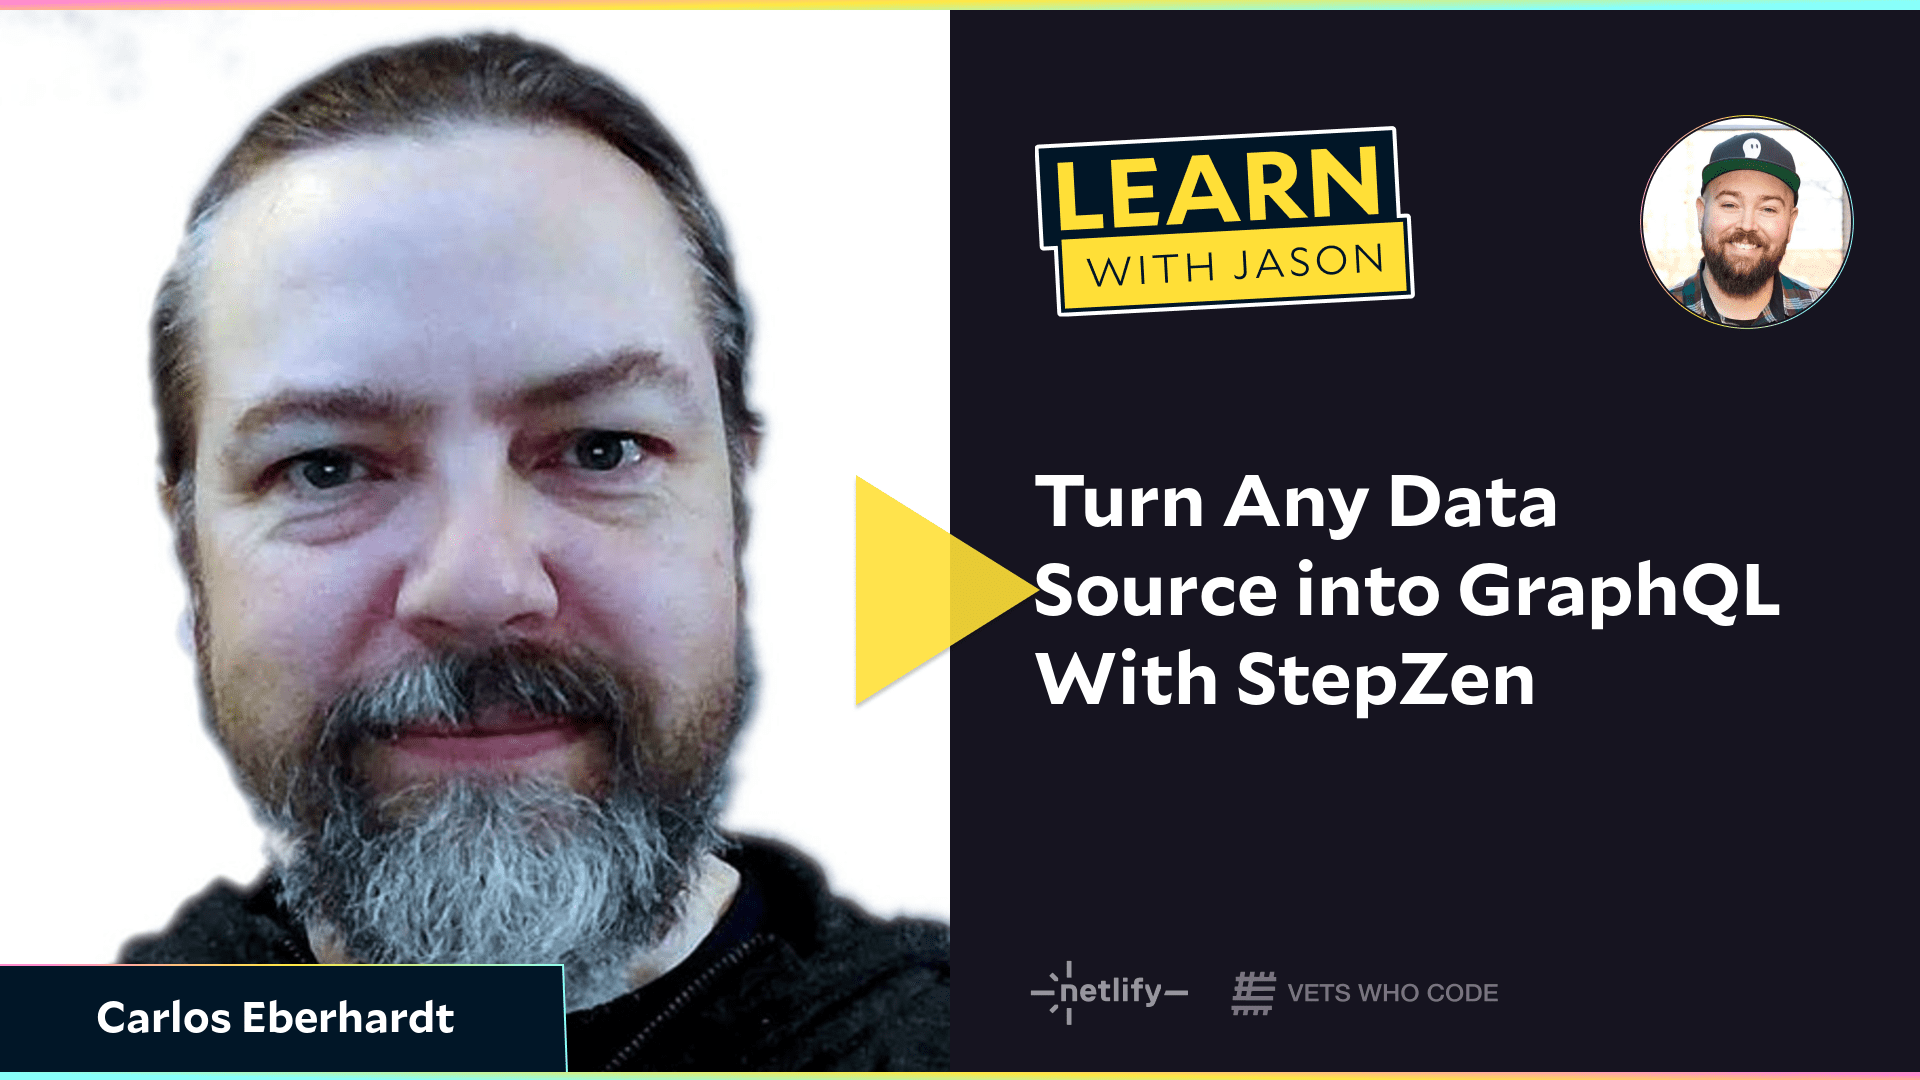 Turn Any Data Source into GraphQL With StepZen (with Carlos Eberhardt)